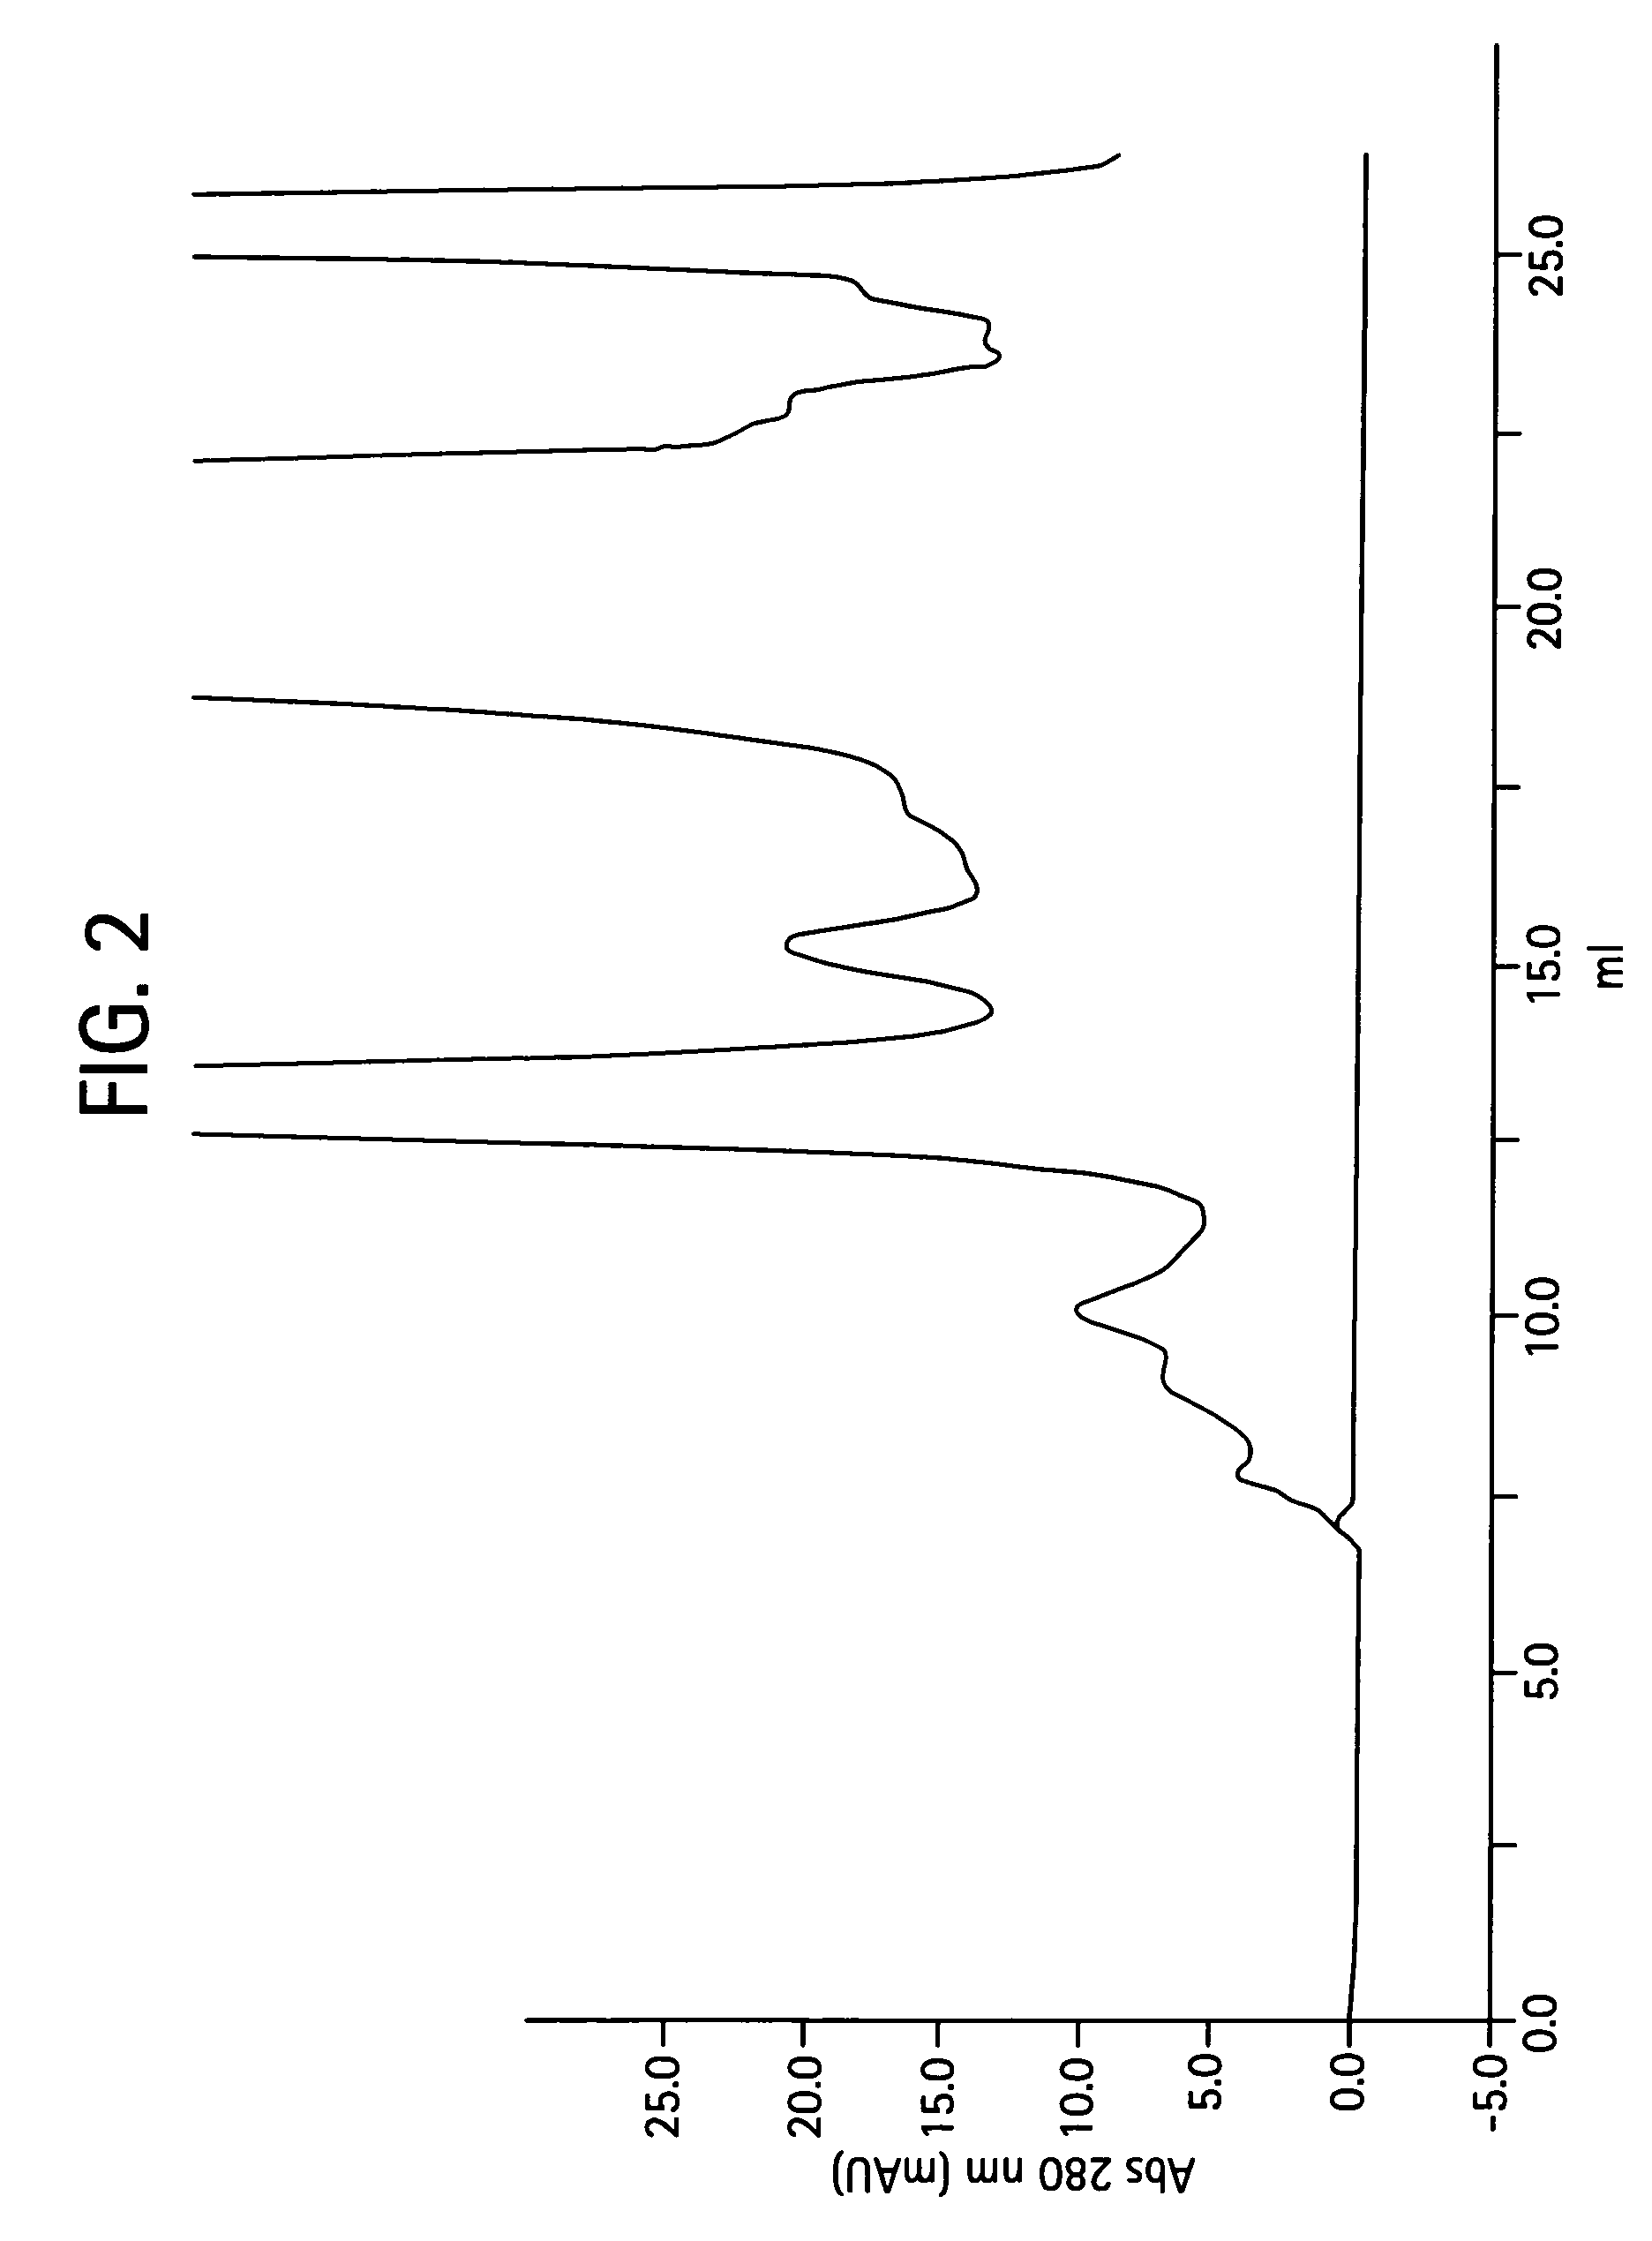 Process for the purification of antibodies